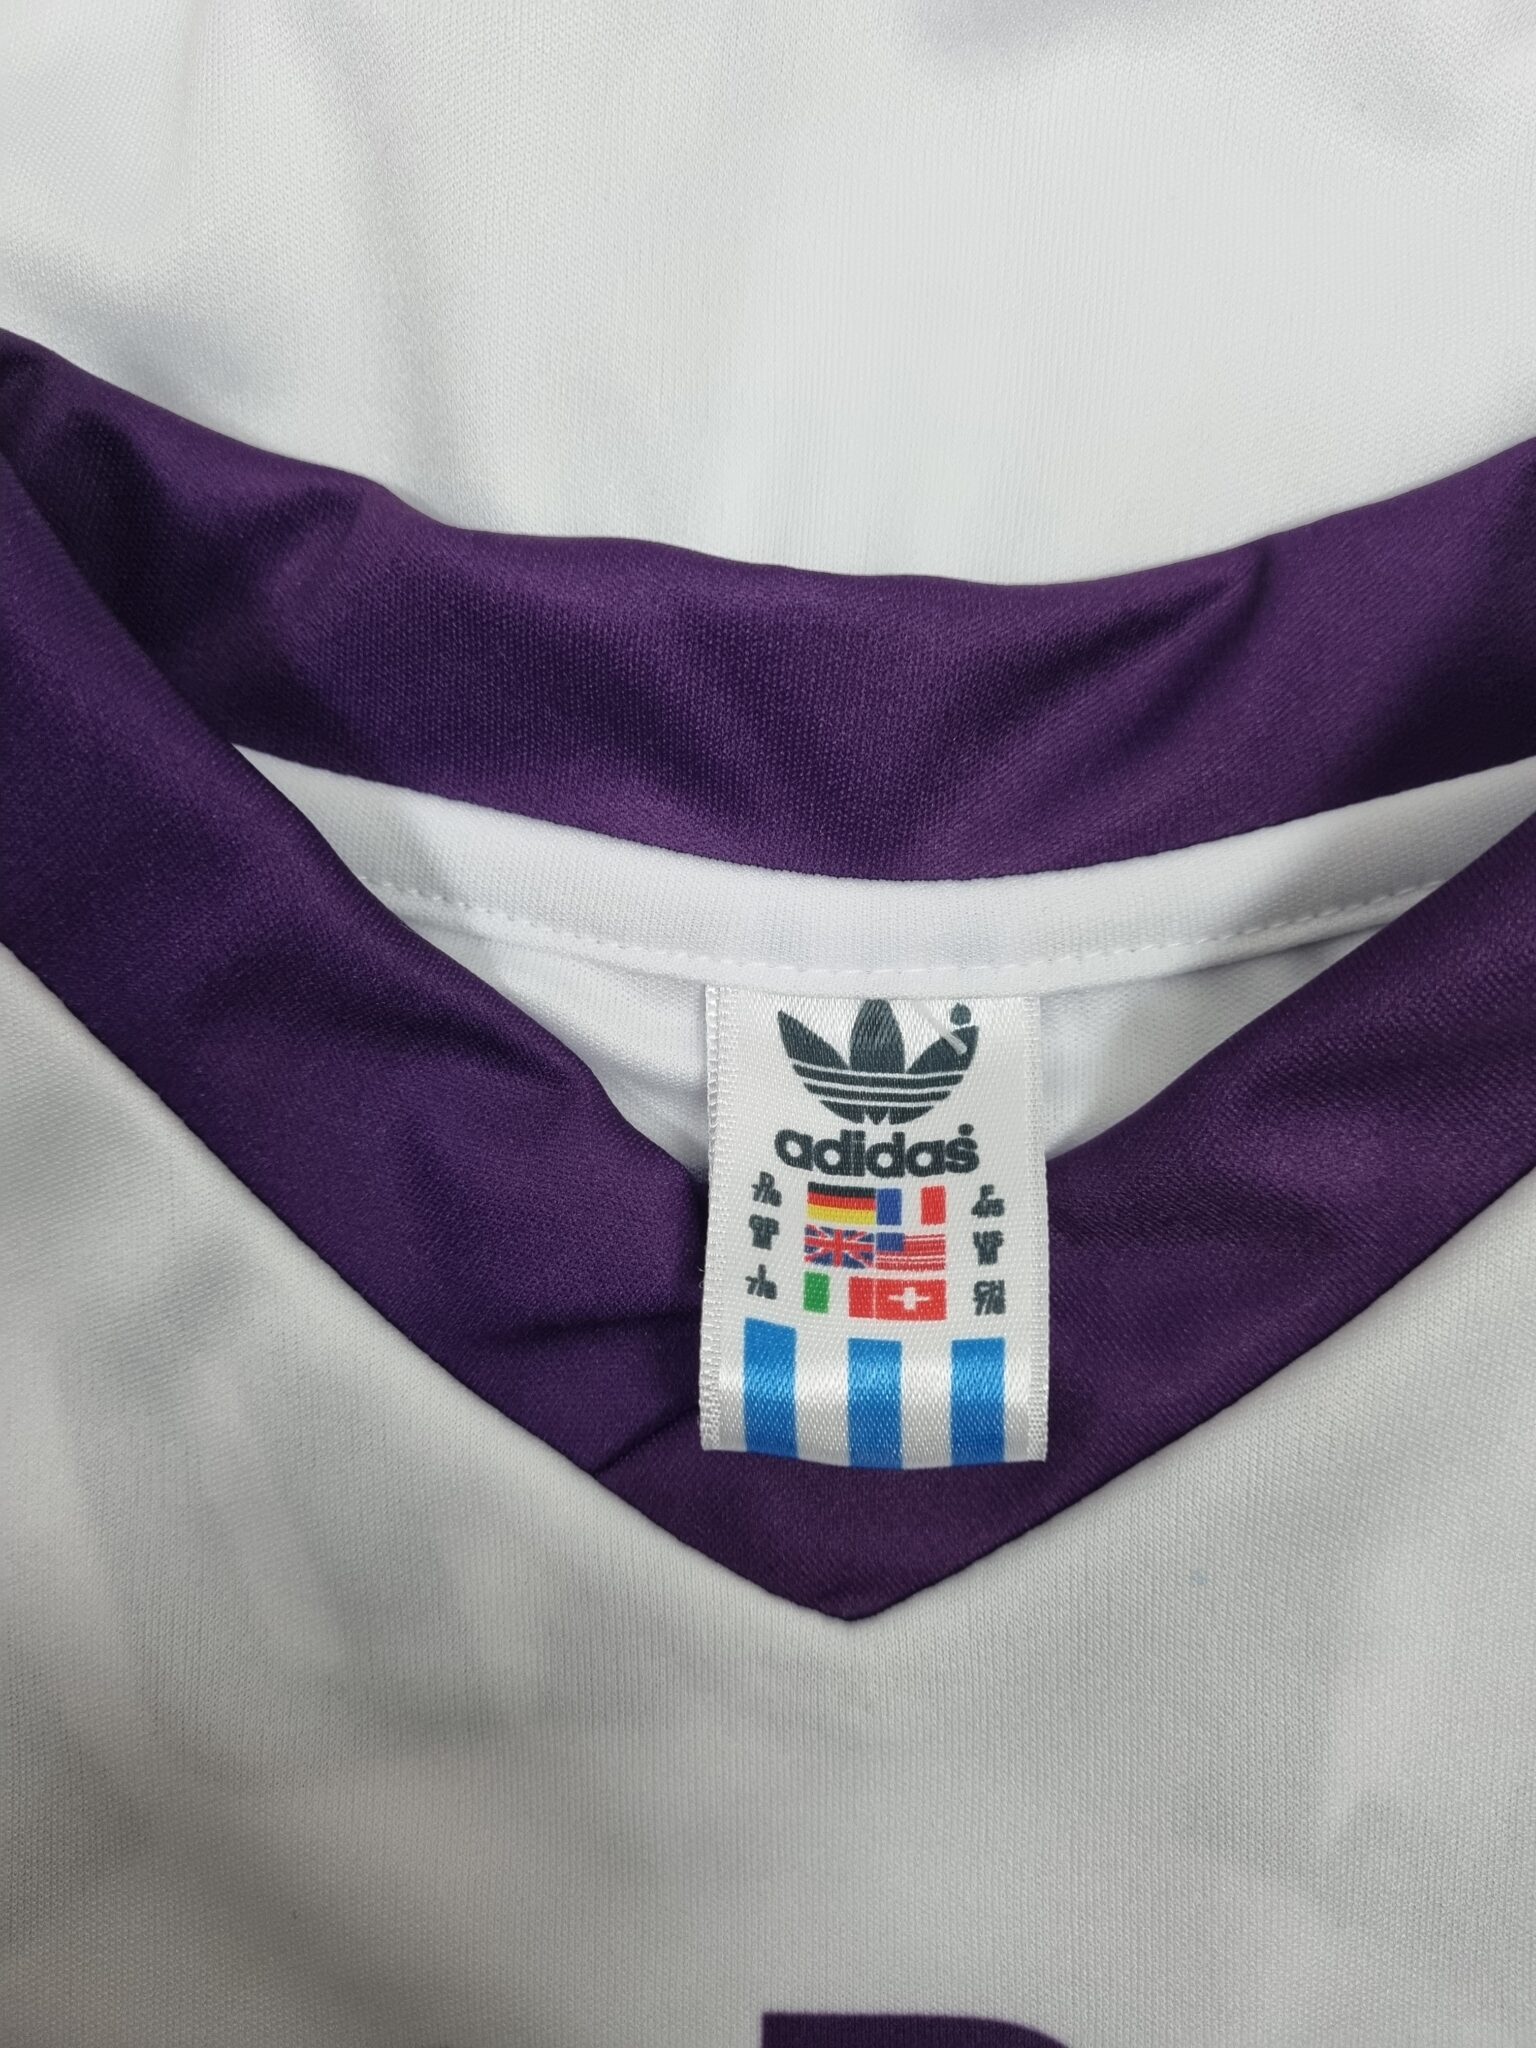 Toulouse FC Away Retro Shirt 1980/1981 Maillot Vintage Jersey France Football - Sport Club Memories